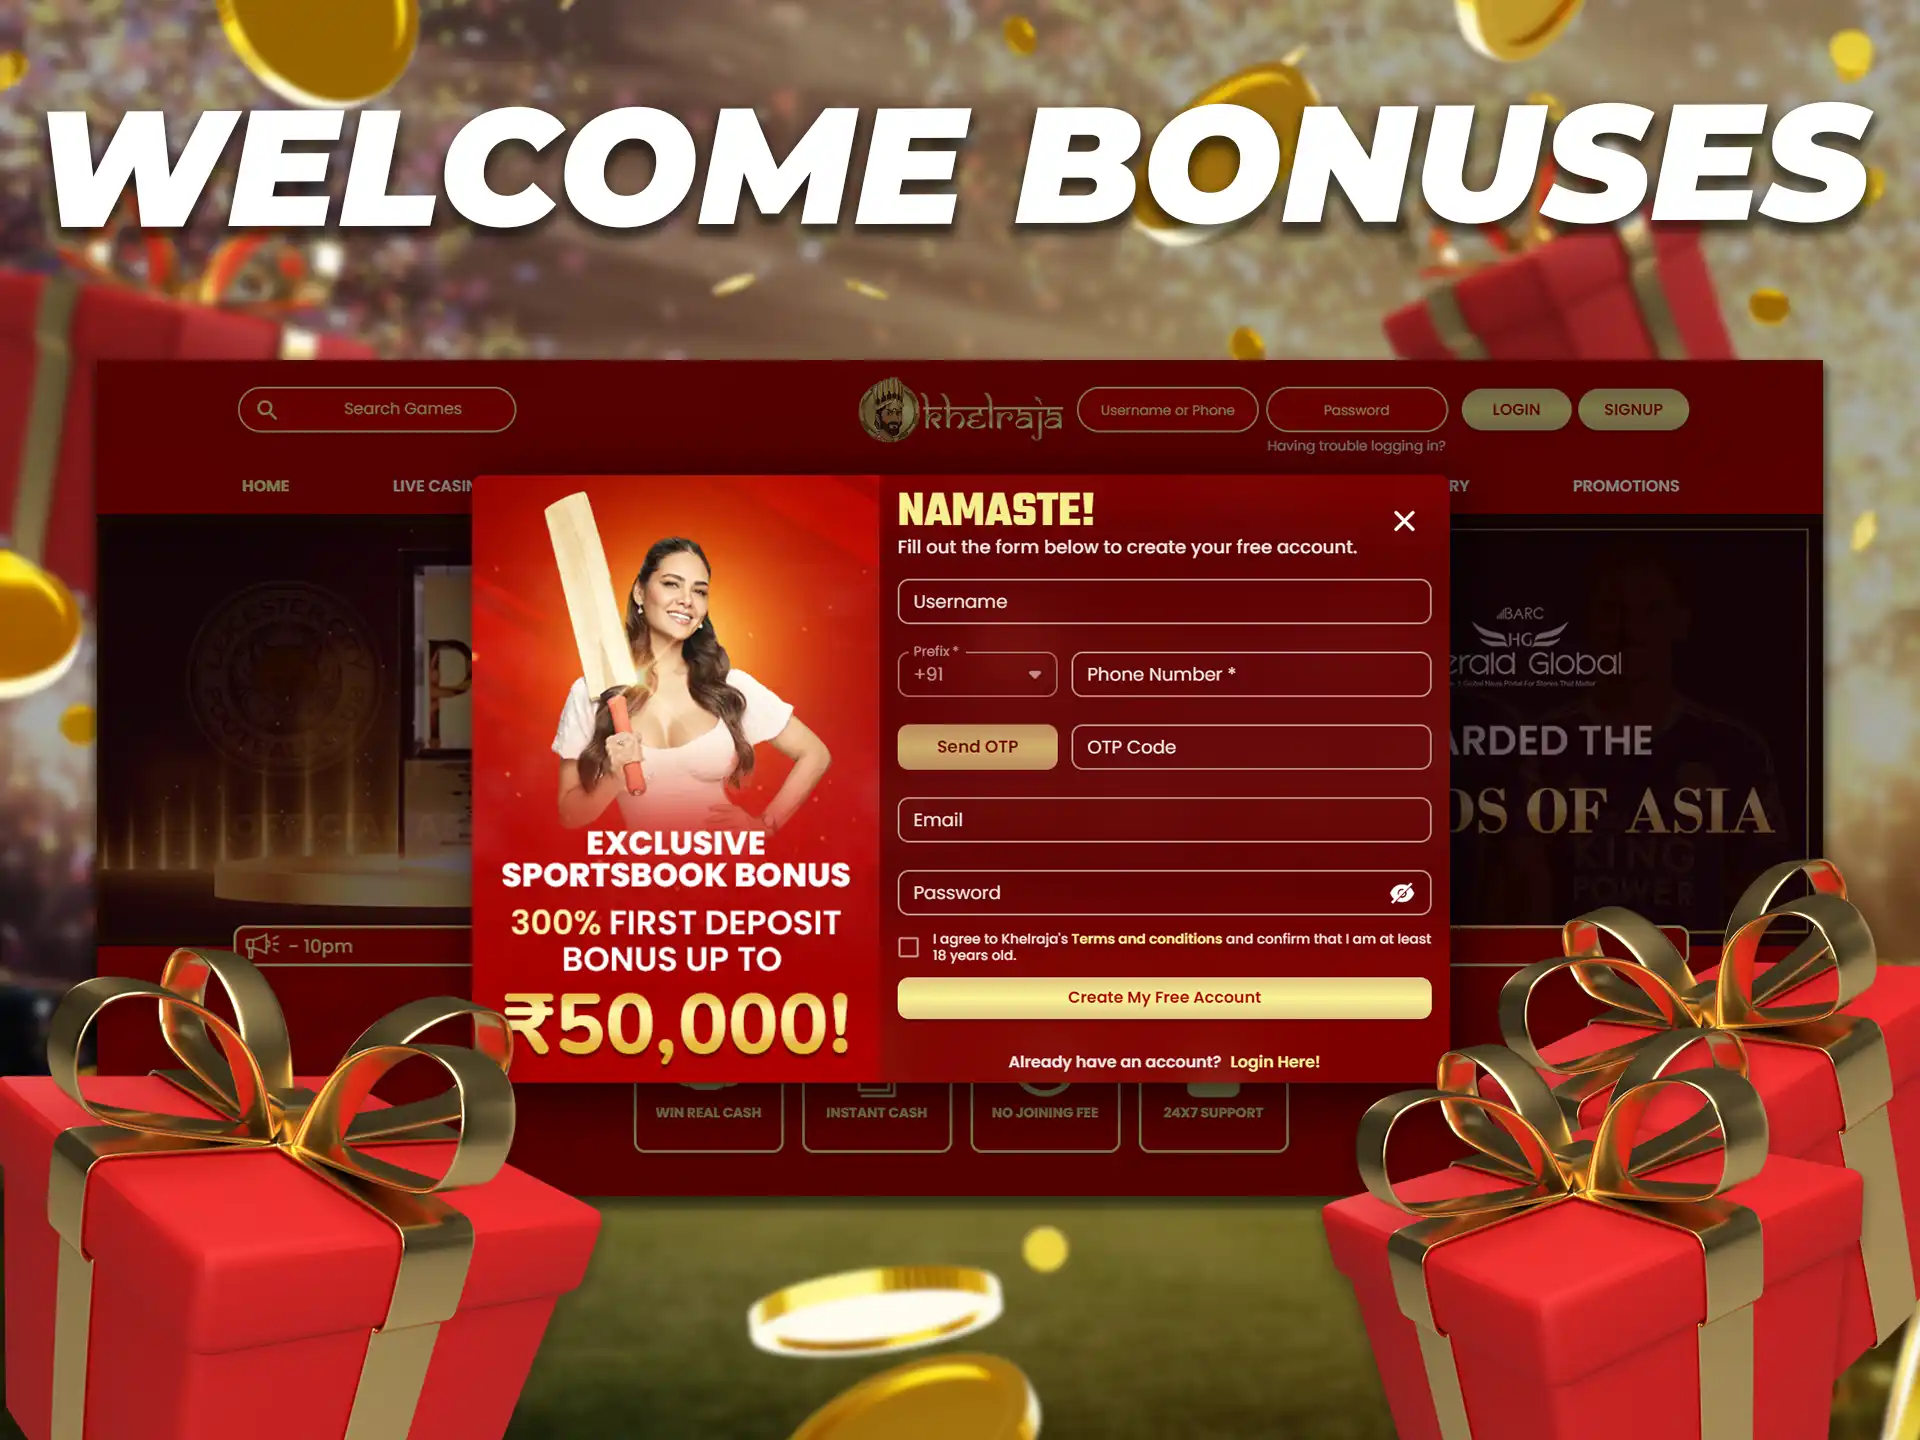 Welcome bonus is available only for new customers of the bookmaker's website.